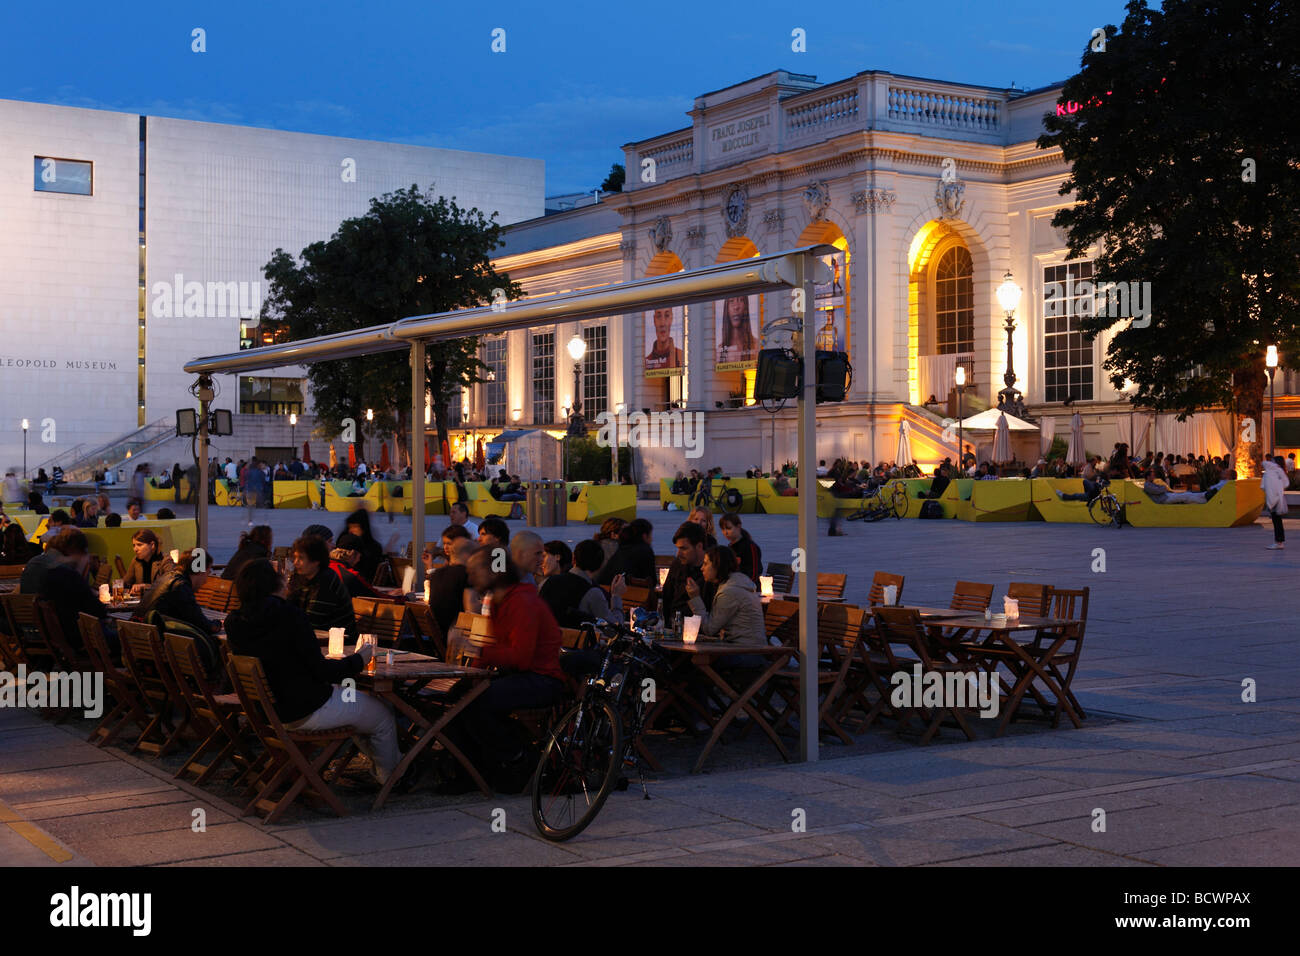 Museumsquartier district, Kunsthalle Wien and the Leopold Museum, Vienna, Austria, Europe Stock Photo